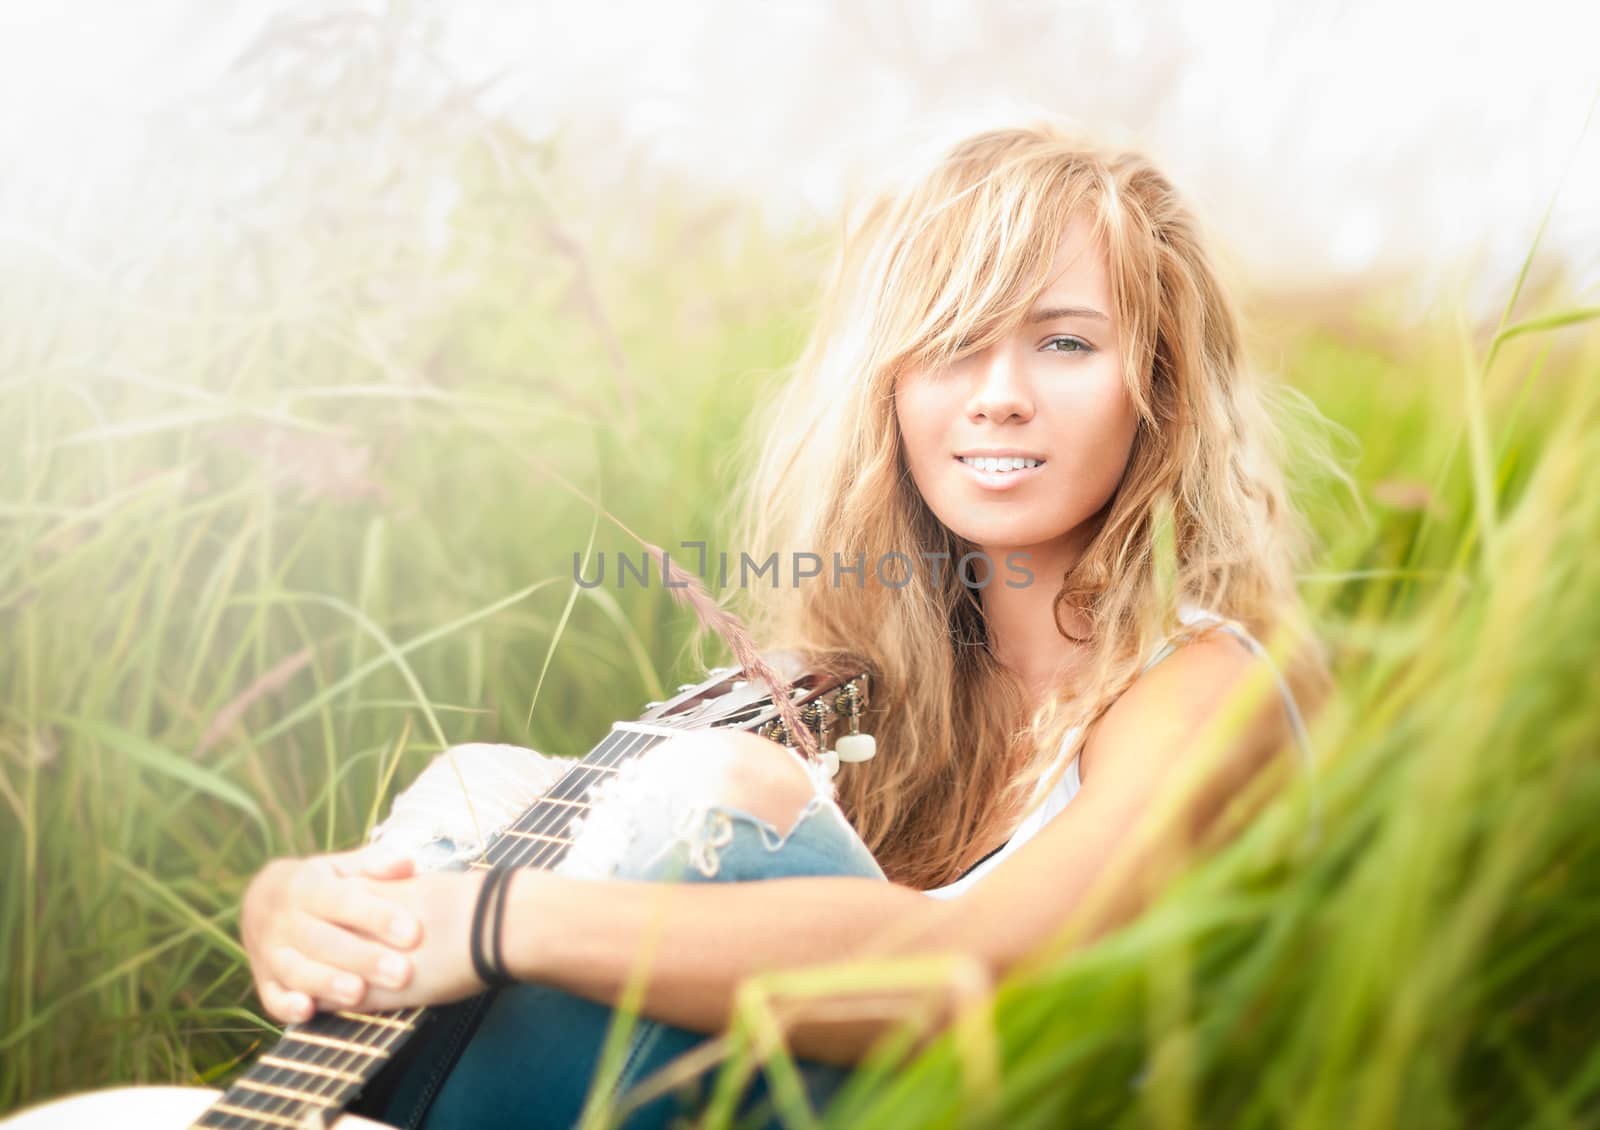 Pretty girl with guitar sitting on ground. Beautiful woman with blonde hair holding musical instrument and smiling. Green grass as background. Sunny summer day. Outdoor activity for young people.